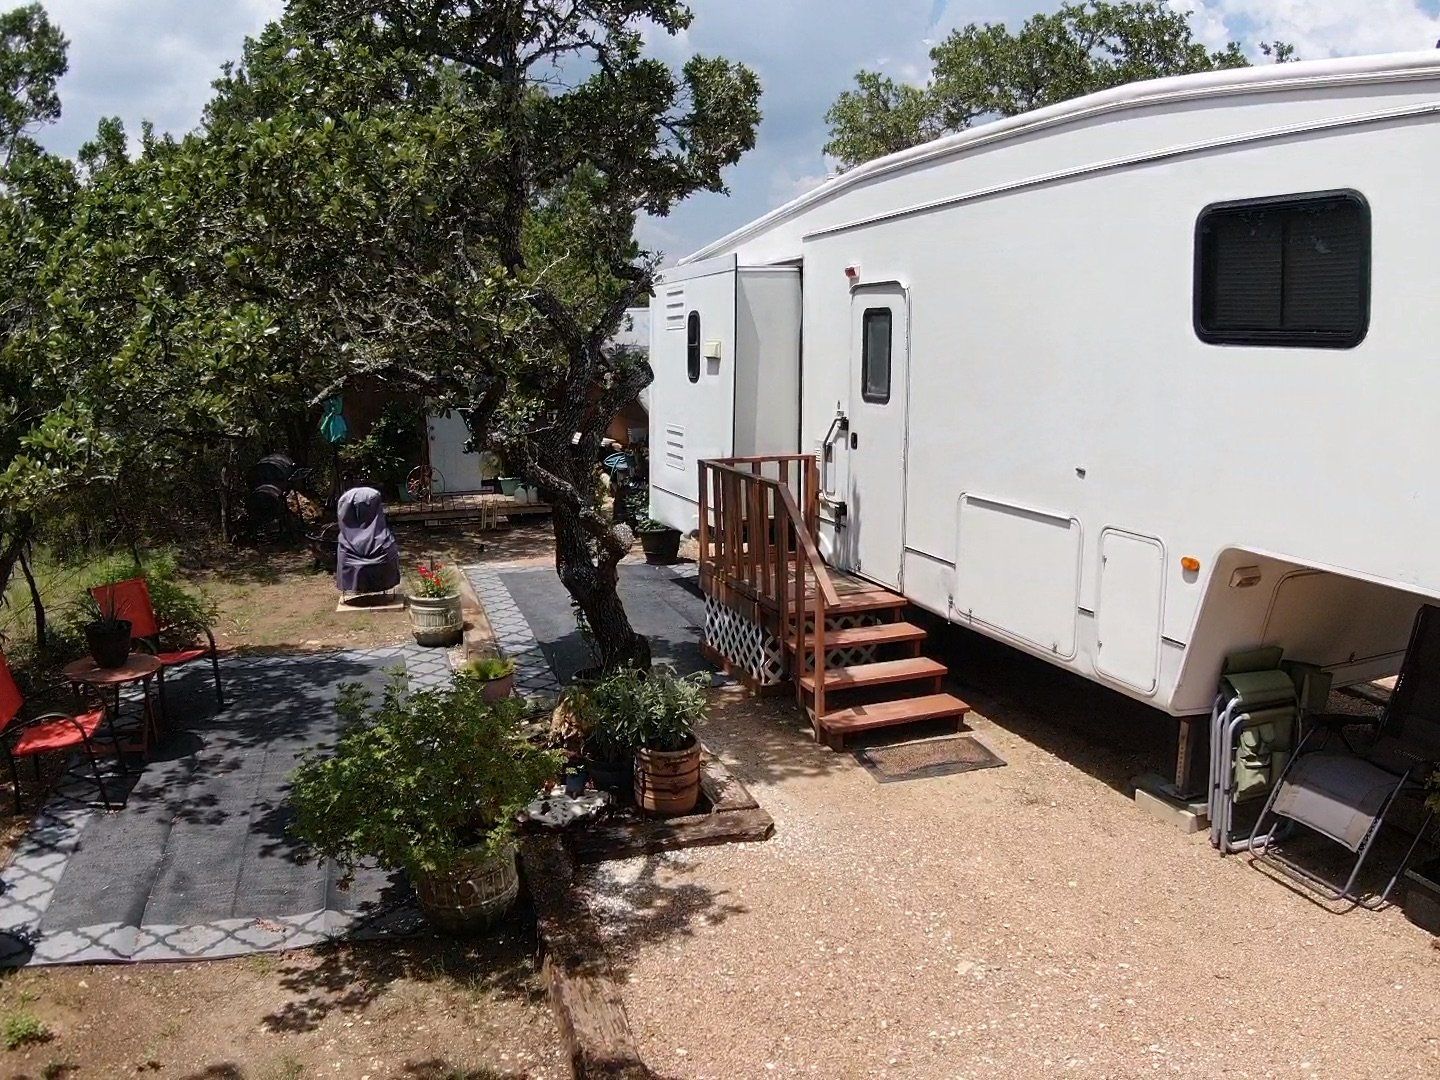 Oak Meadows RV Park is one of the newest Full-Time RV Parks located near New Braunfels, TX in Canyon Lake, Texas!